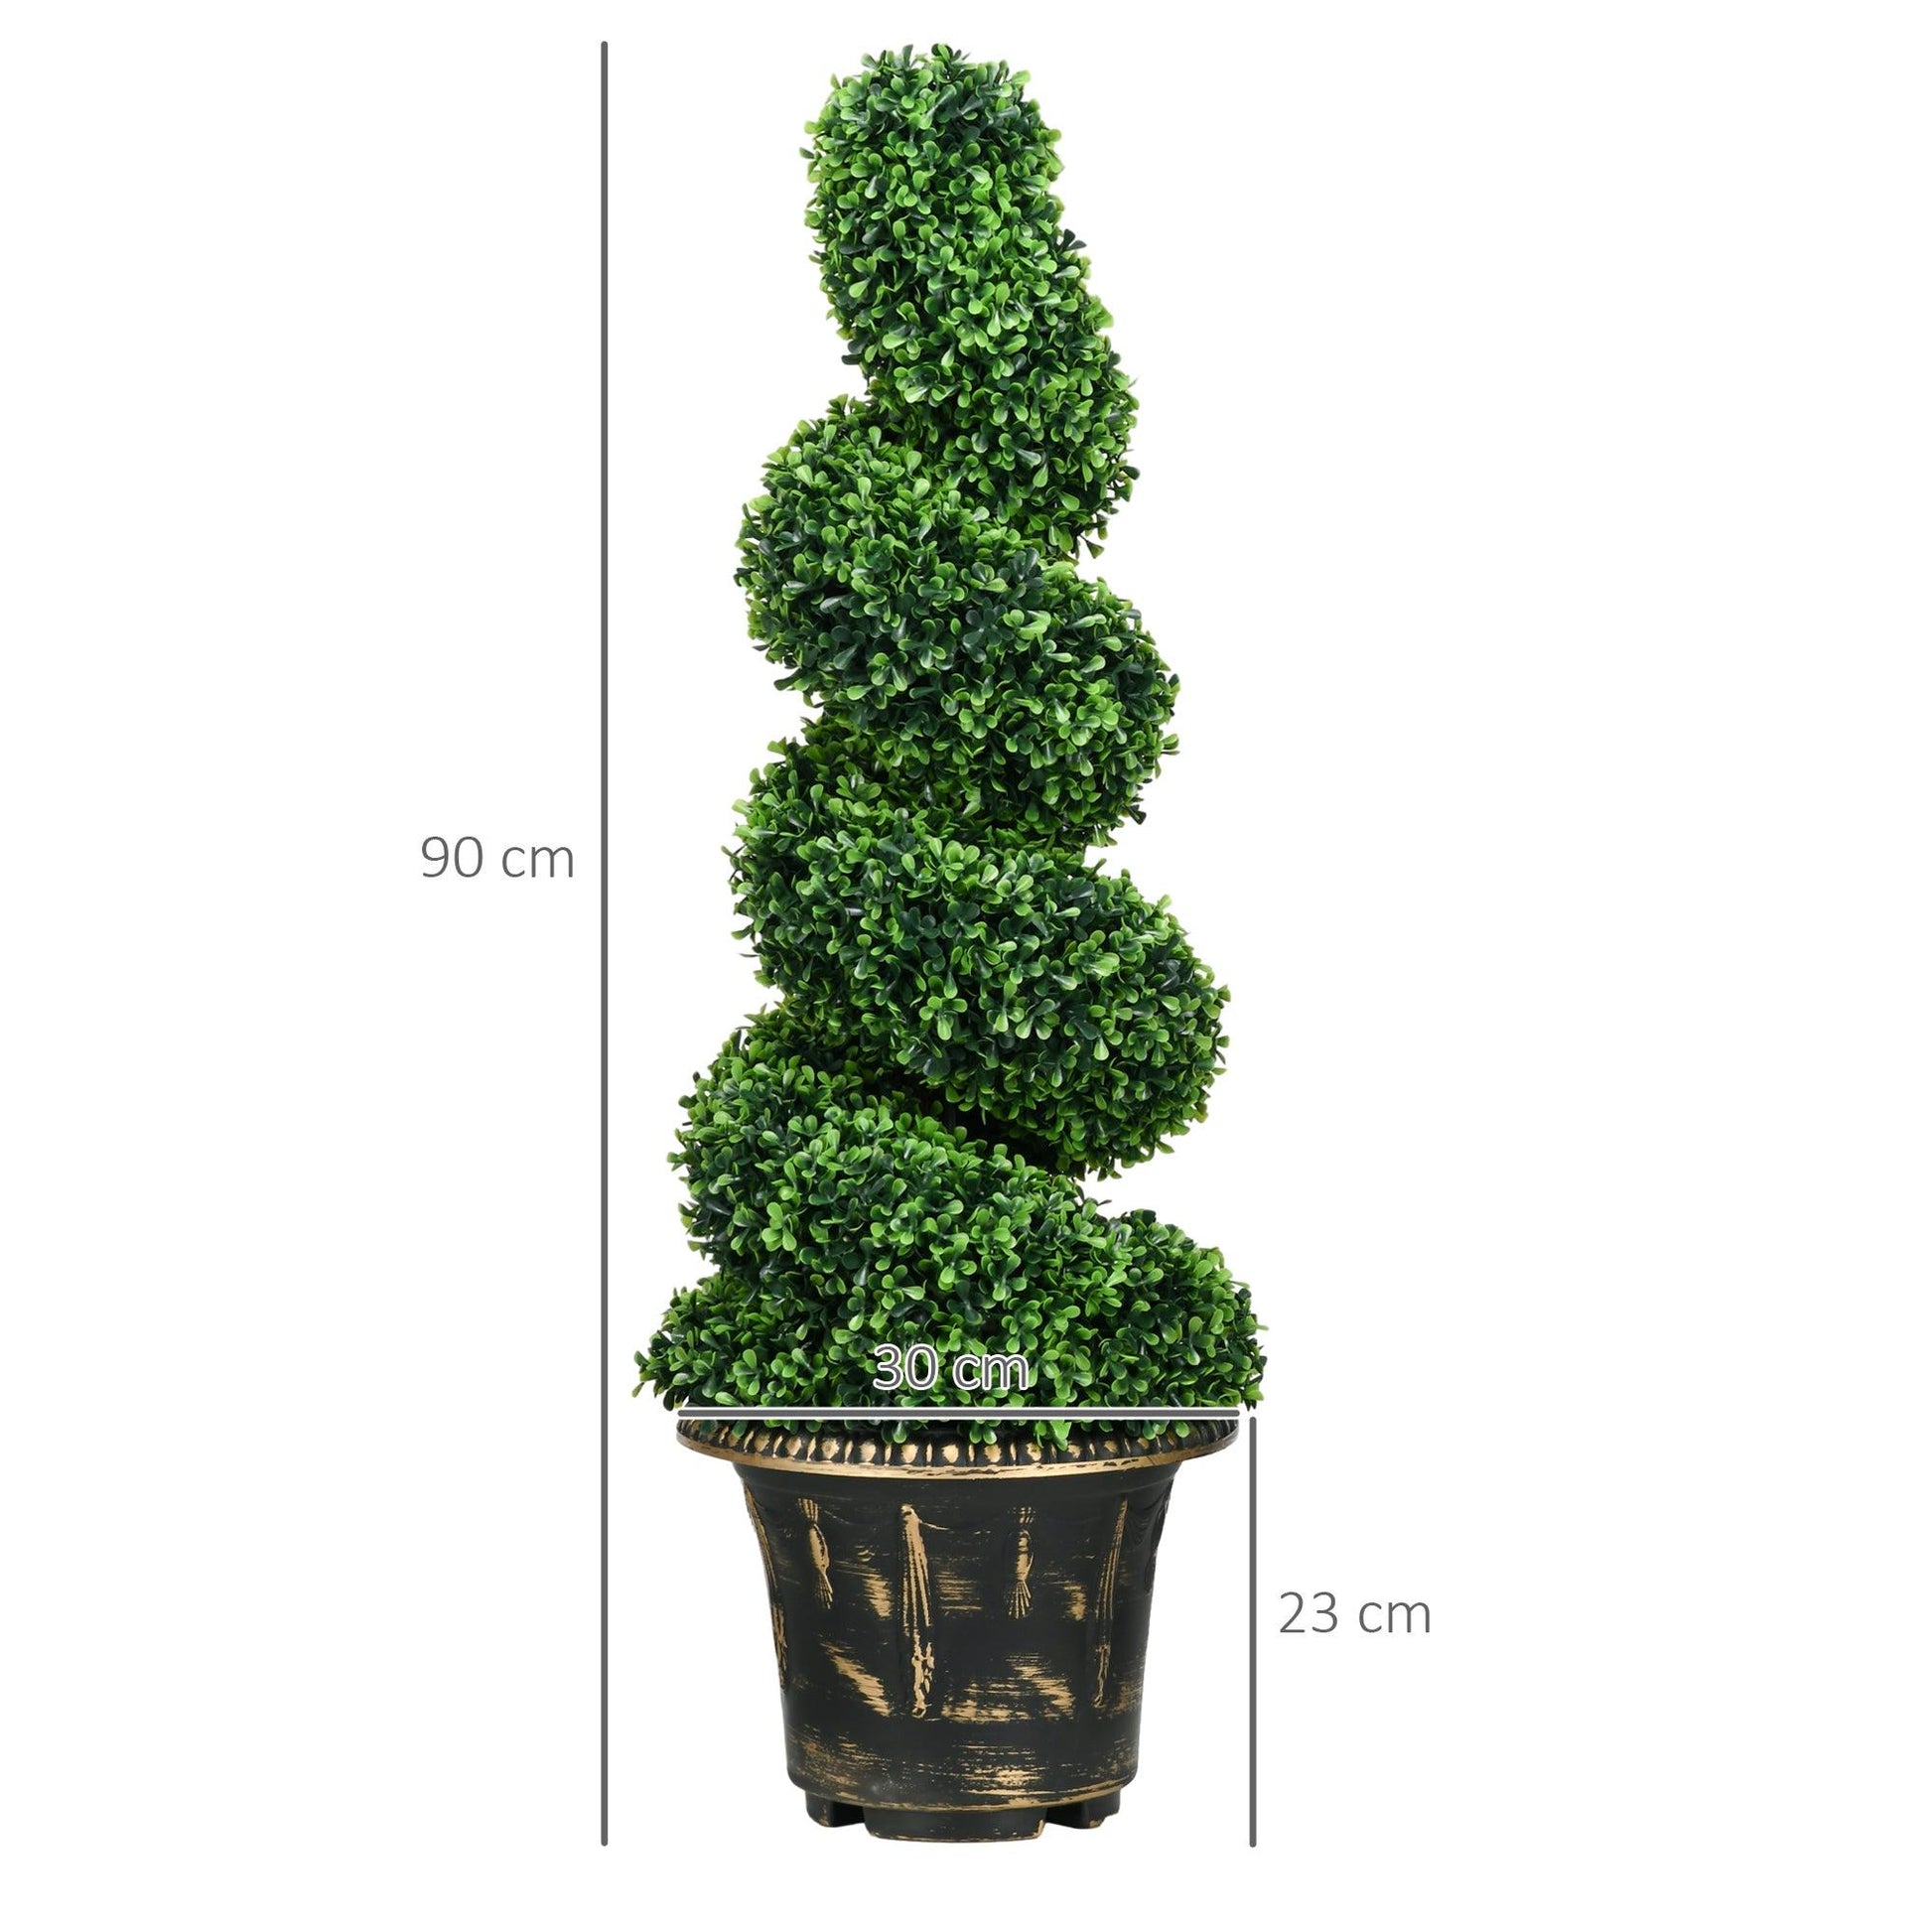 HOMCOM Set of 2 Artificial Plants, Topiary Spiral Boxwood Trees with Pot, for Home Indoor Outdoor Decor, 90cm - ALL4U RETAILER LTD